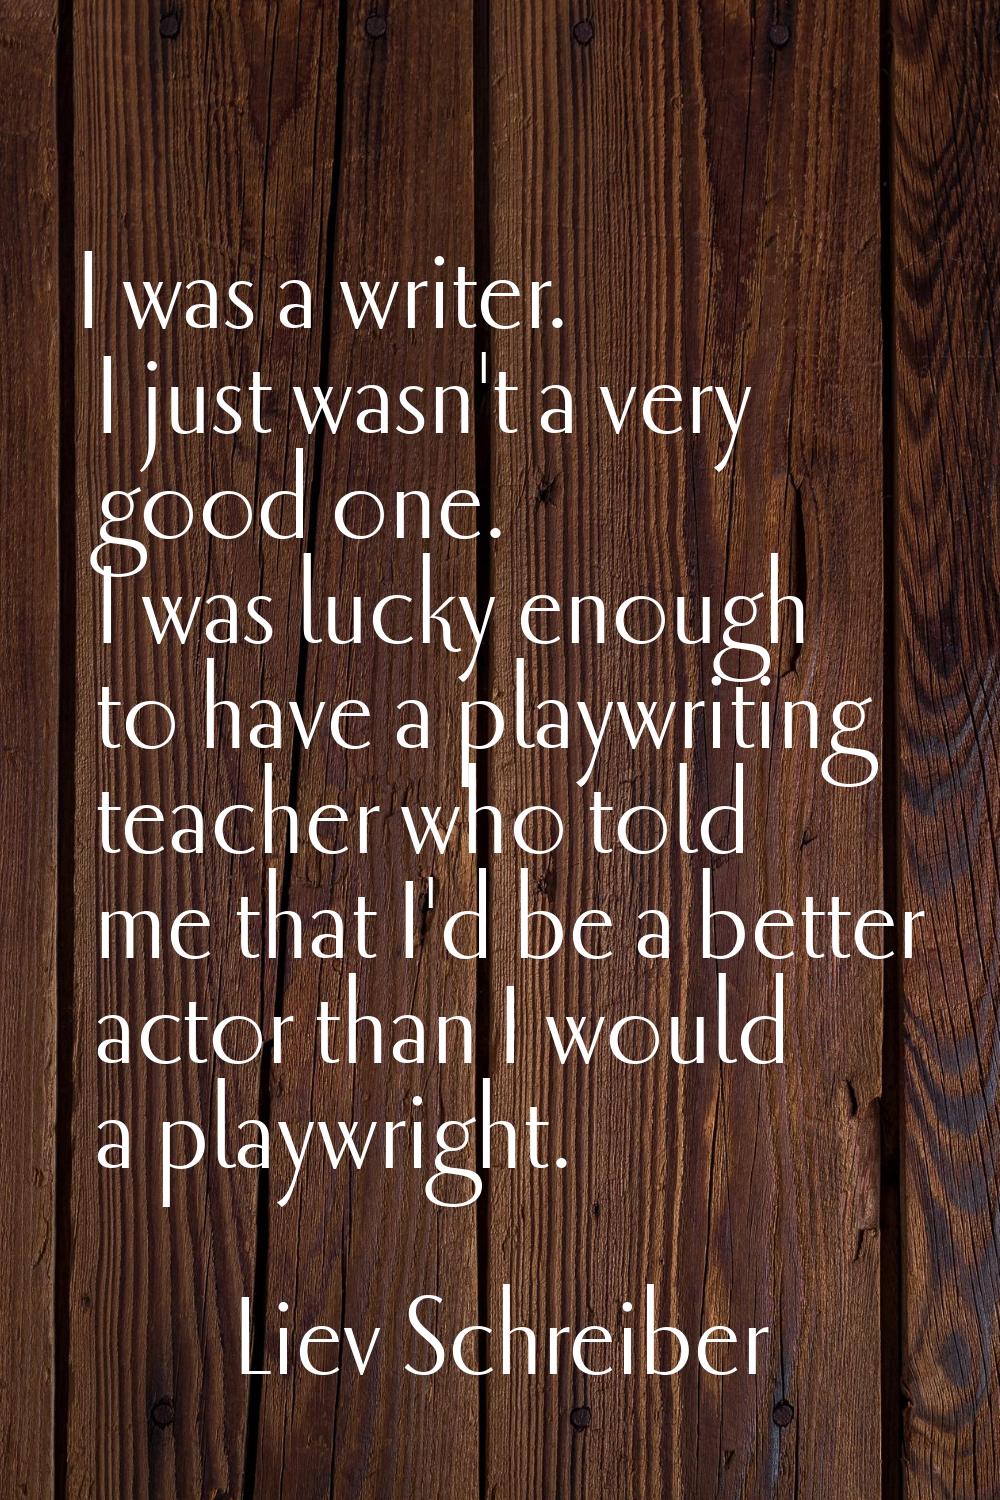 I was a writer. I just wasn't a very good one. I was lucky enough to have a playwriting teacher who